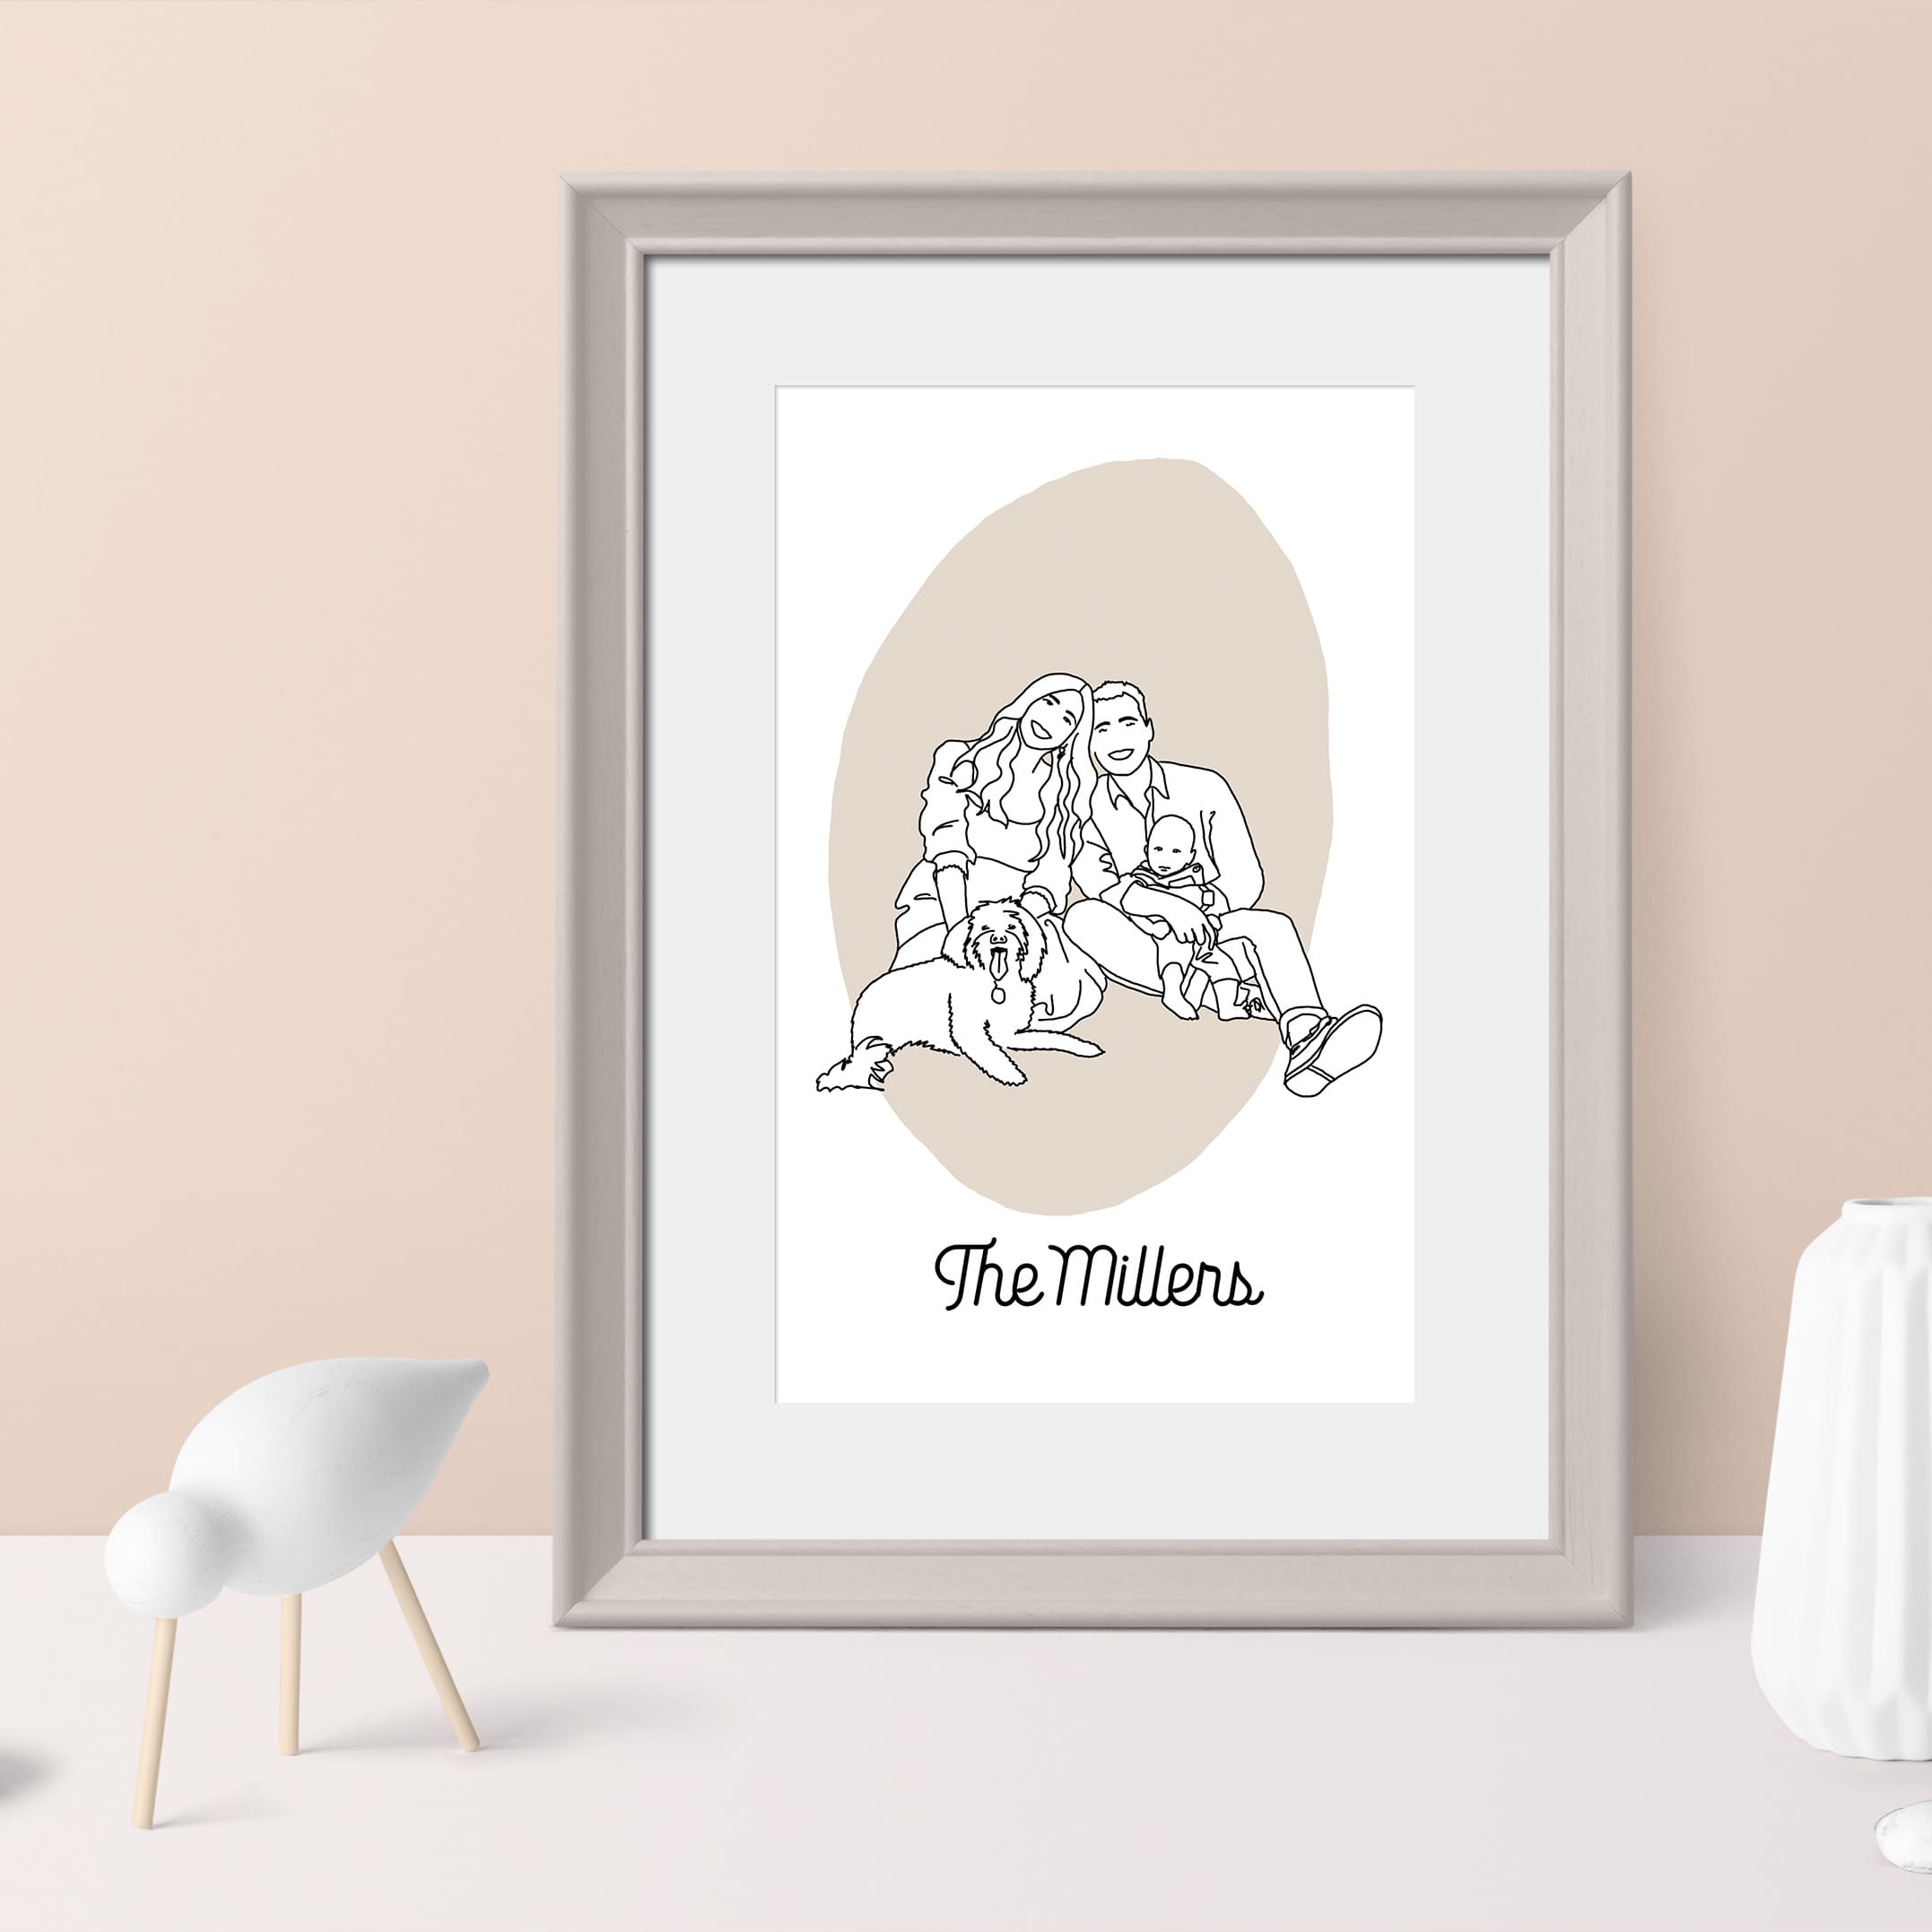 custom family portrait with baby and dog in minimal line art style hand drawn from your photo in digital format